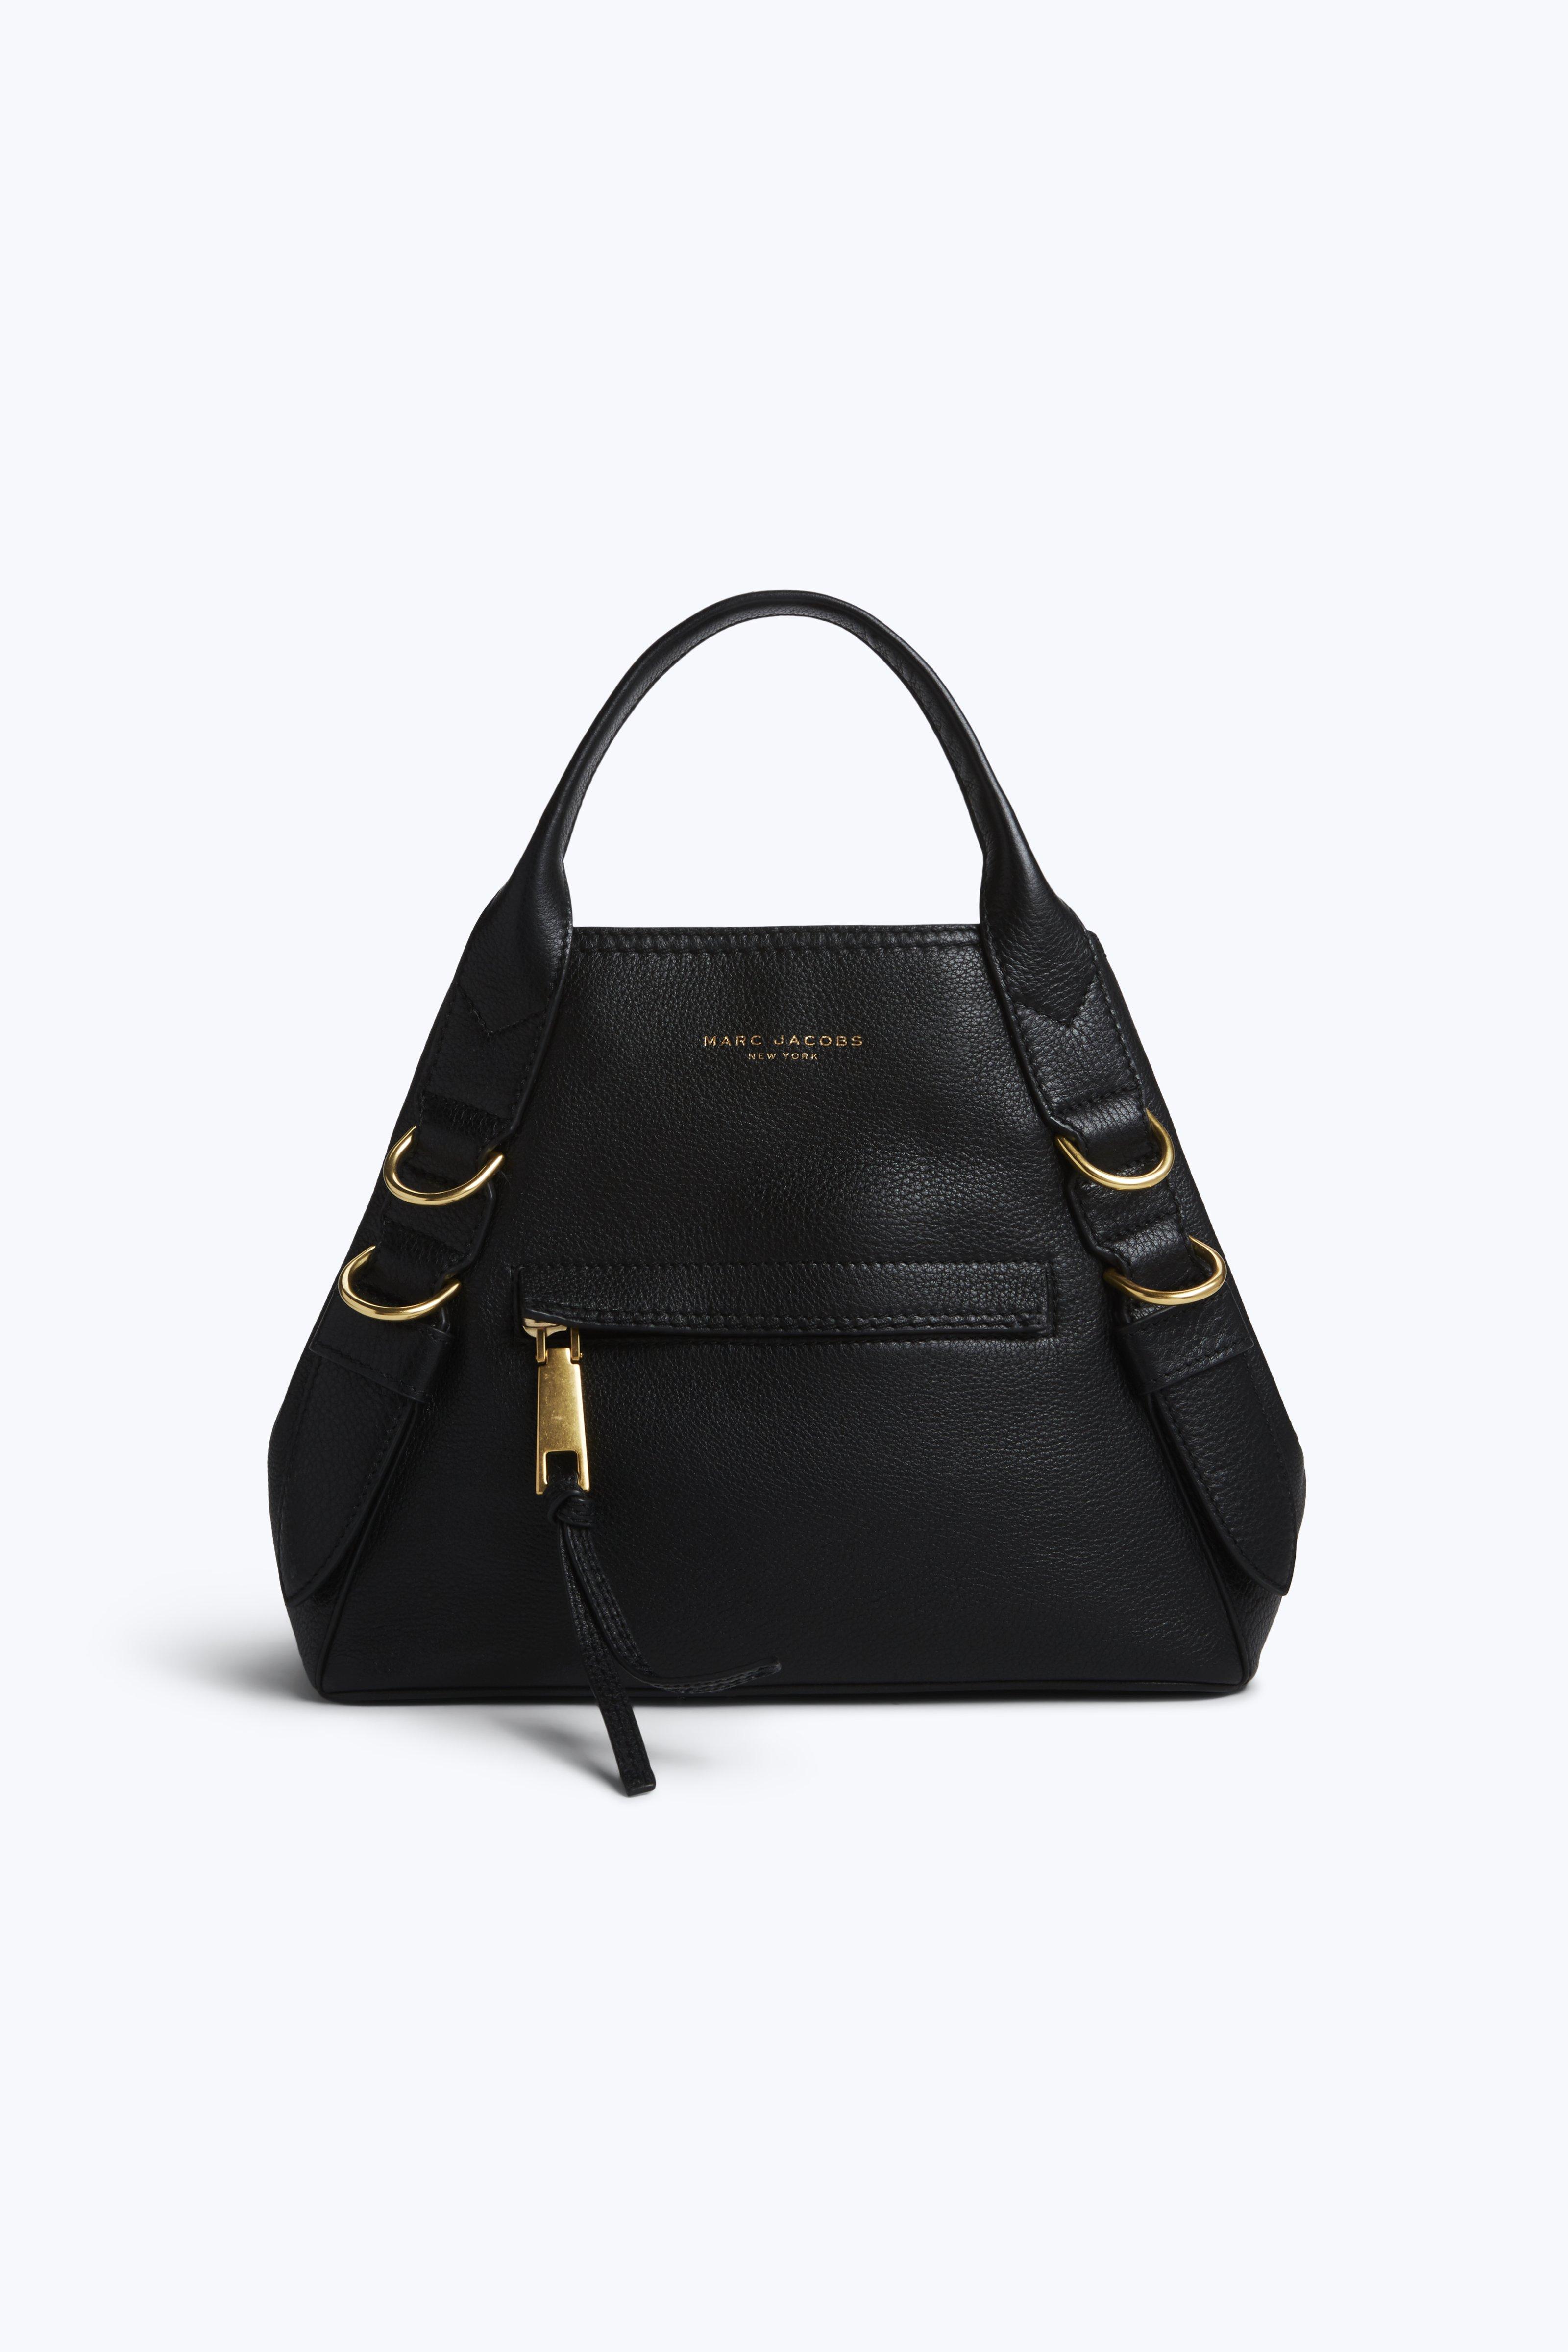 MARC JACOBS Small Anchor Leather Shoulder Bag in Black | ModeSens